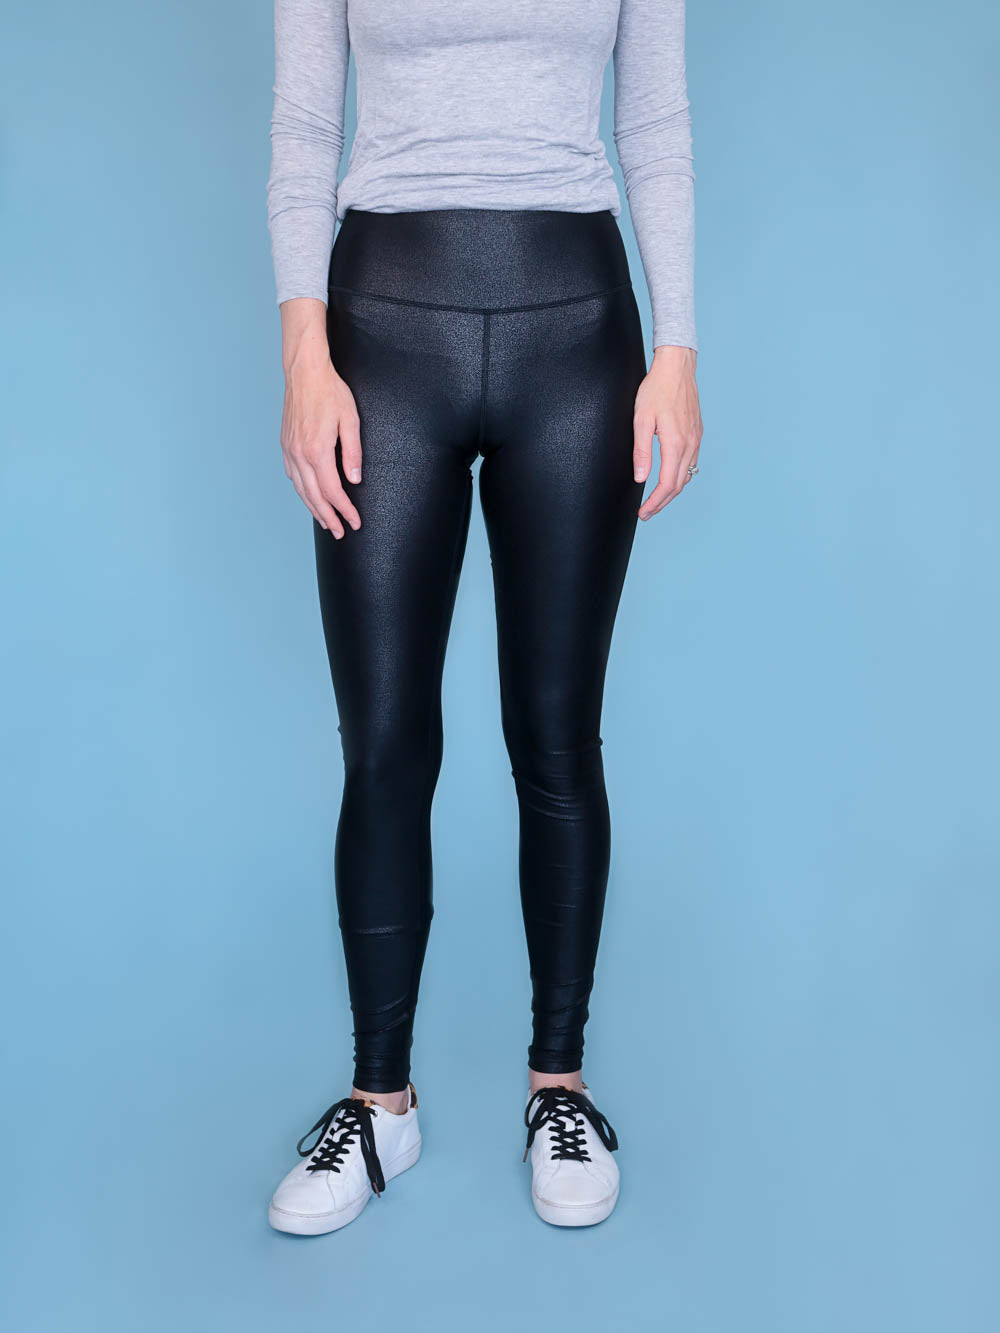 Faux Leather Leggings for Tall Girls